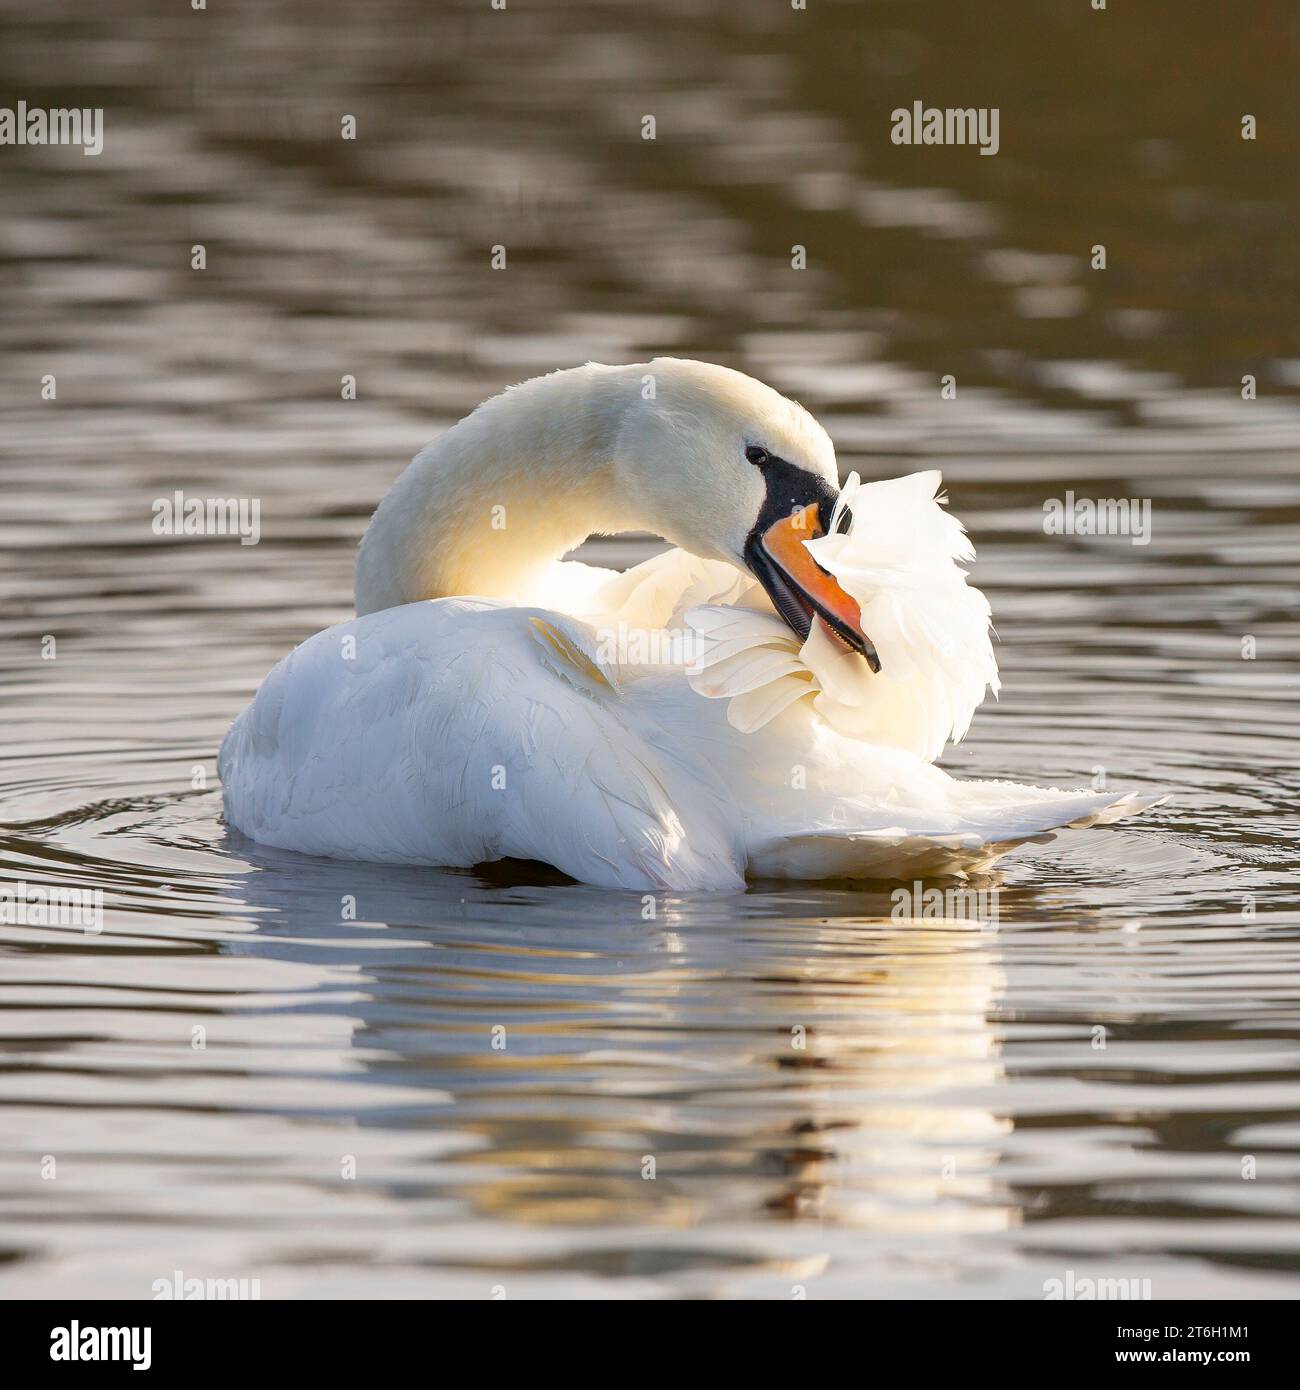 Kidderminster, UK. 10th November, 2023. UK weather: the local wildlife enjoys some much needed sunshine today, quite a contrast to the past wet, gloomy week. The weather continues dry for tomorrow's Armistice Day but turns wet again for Sunday. A lone mute swan preens in the morning sunshine. Credit: Lee Hudson/Alamy Live News Stock Photo